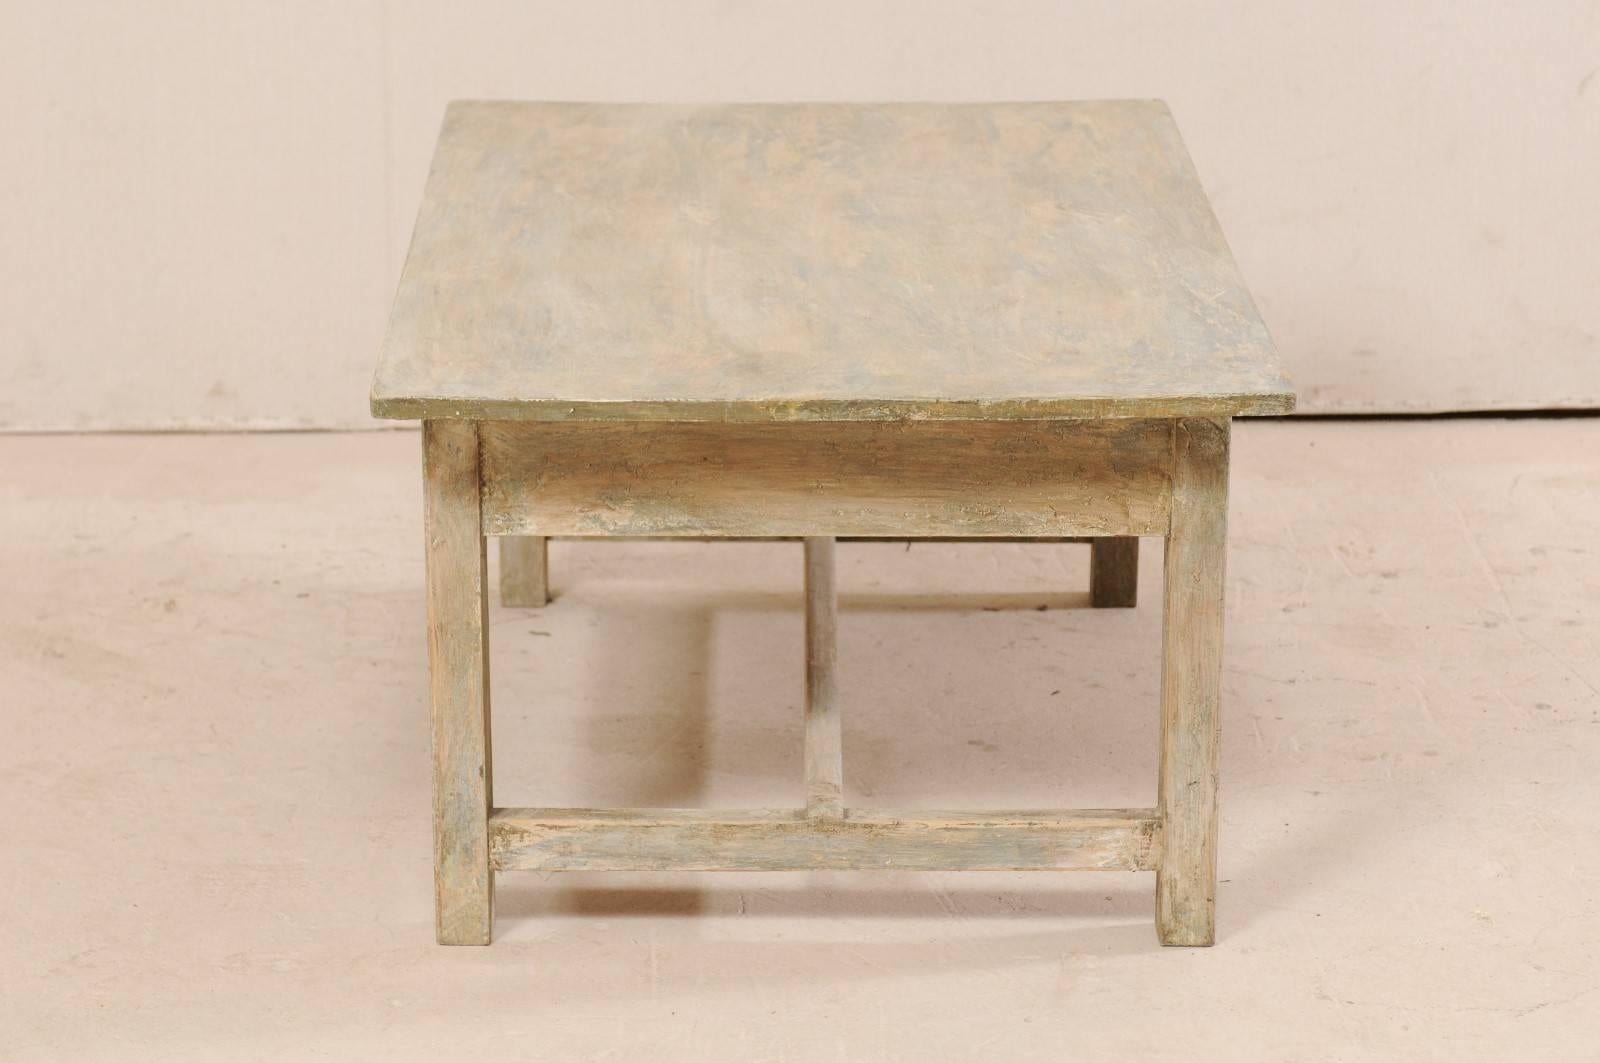 Swedish Mid-20th Century Painted Wood Coffee Table in Neutral Beige Tones 4